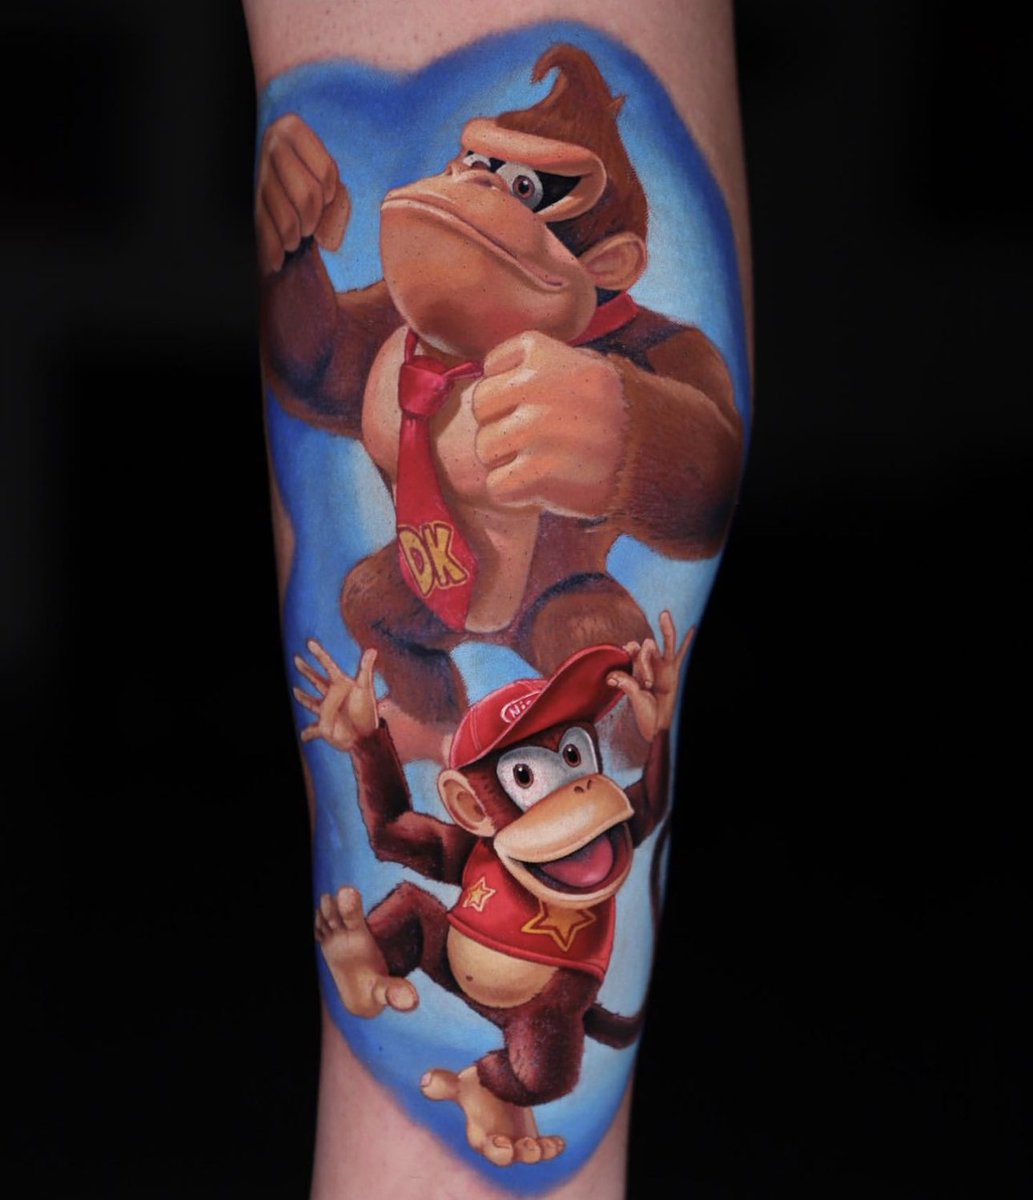 Donkey and diddy kong! Can’t wait to keep working on this leg sleeve #tattoo #videogames